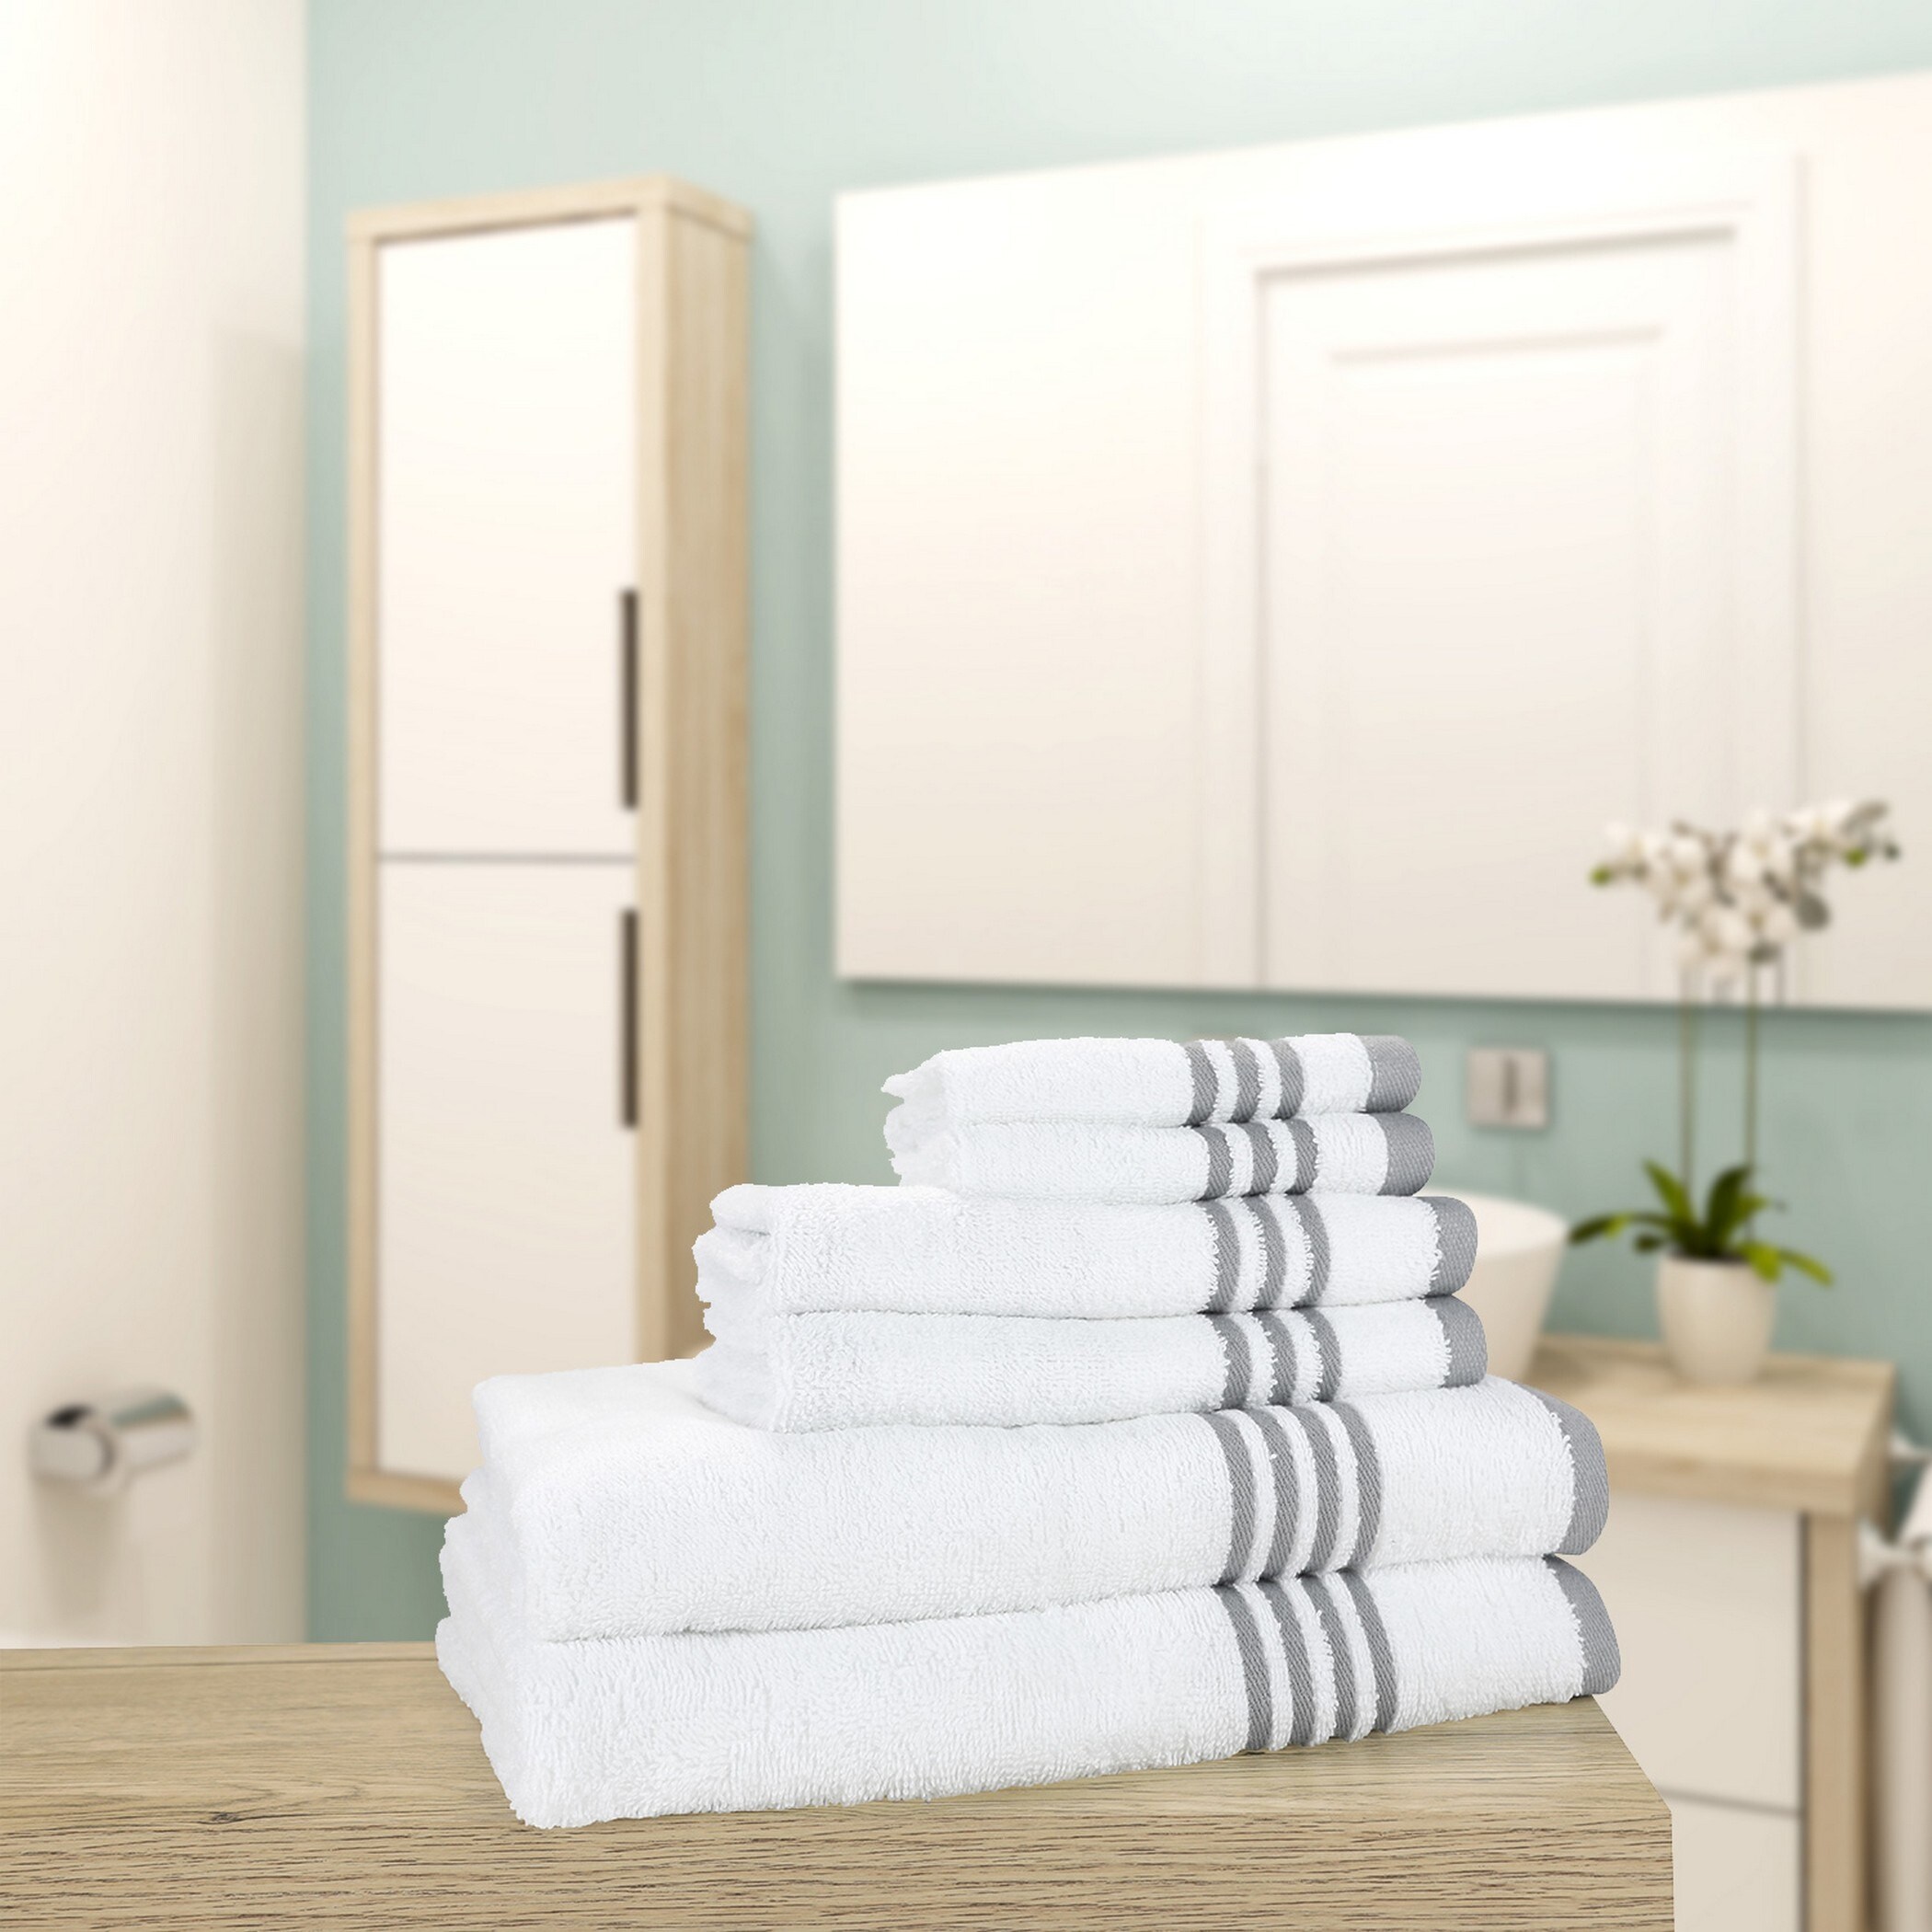 https://ak1.ostkcdn.com/images/products/is/images/direct/52e1111f43774fcc2262c154b53d9668fe61ac94/Arkwright-Metro-Soft-6-Piece-Towel-Set.jpg